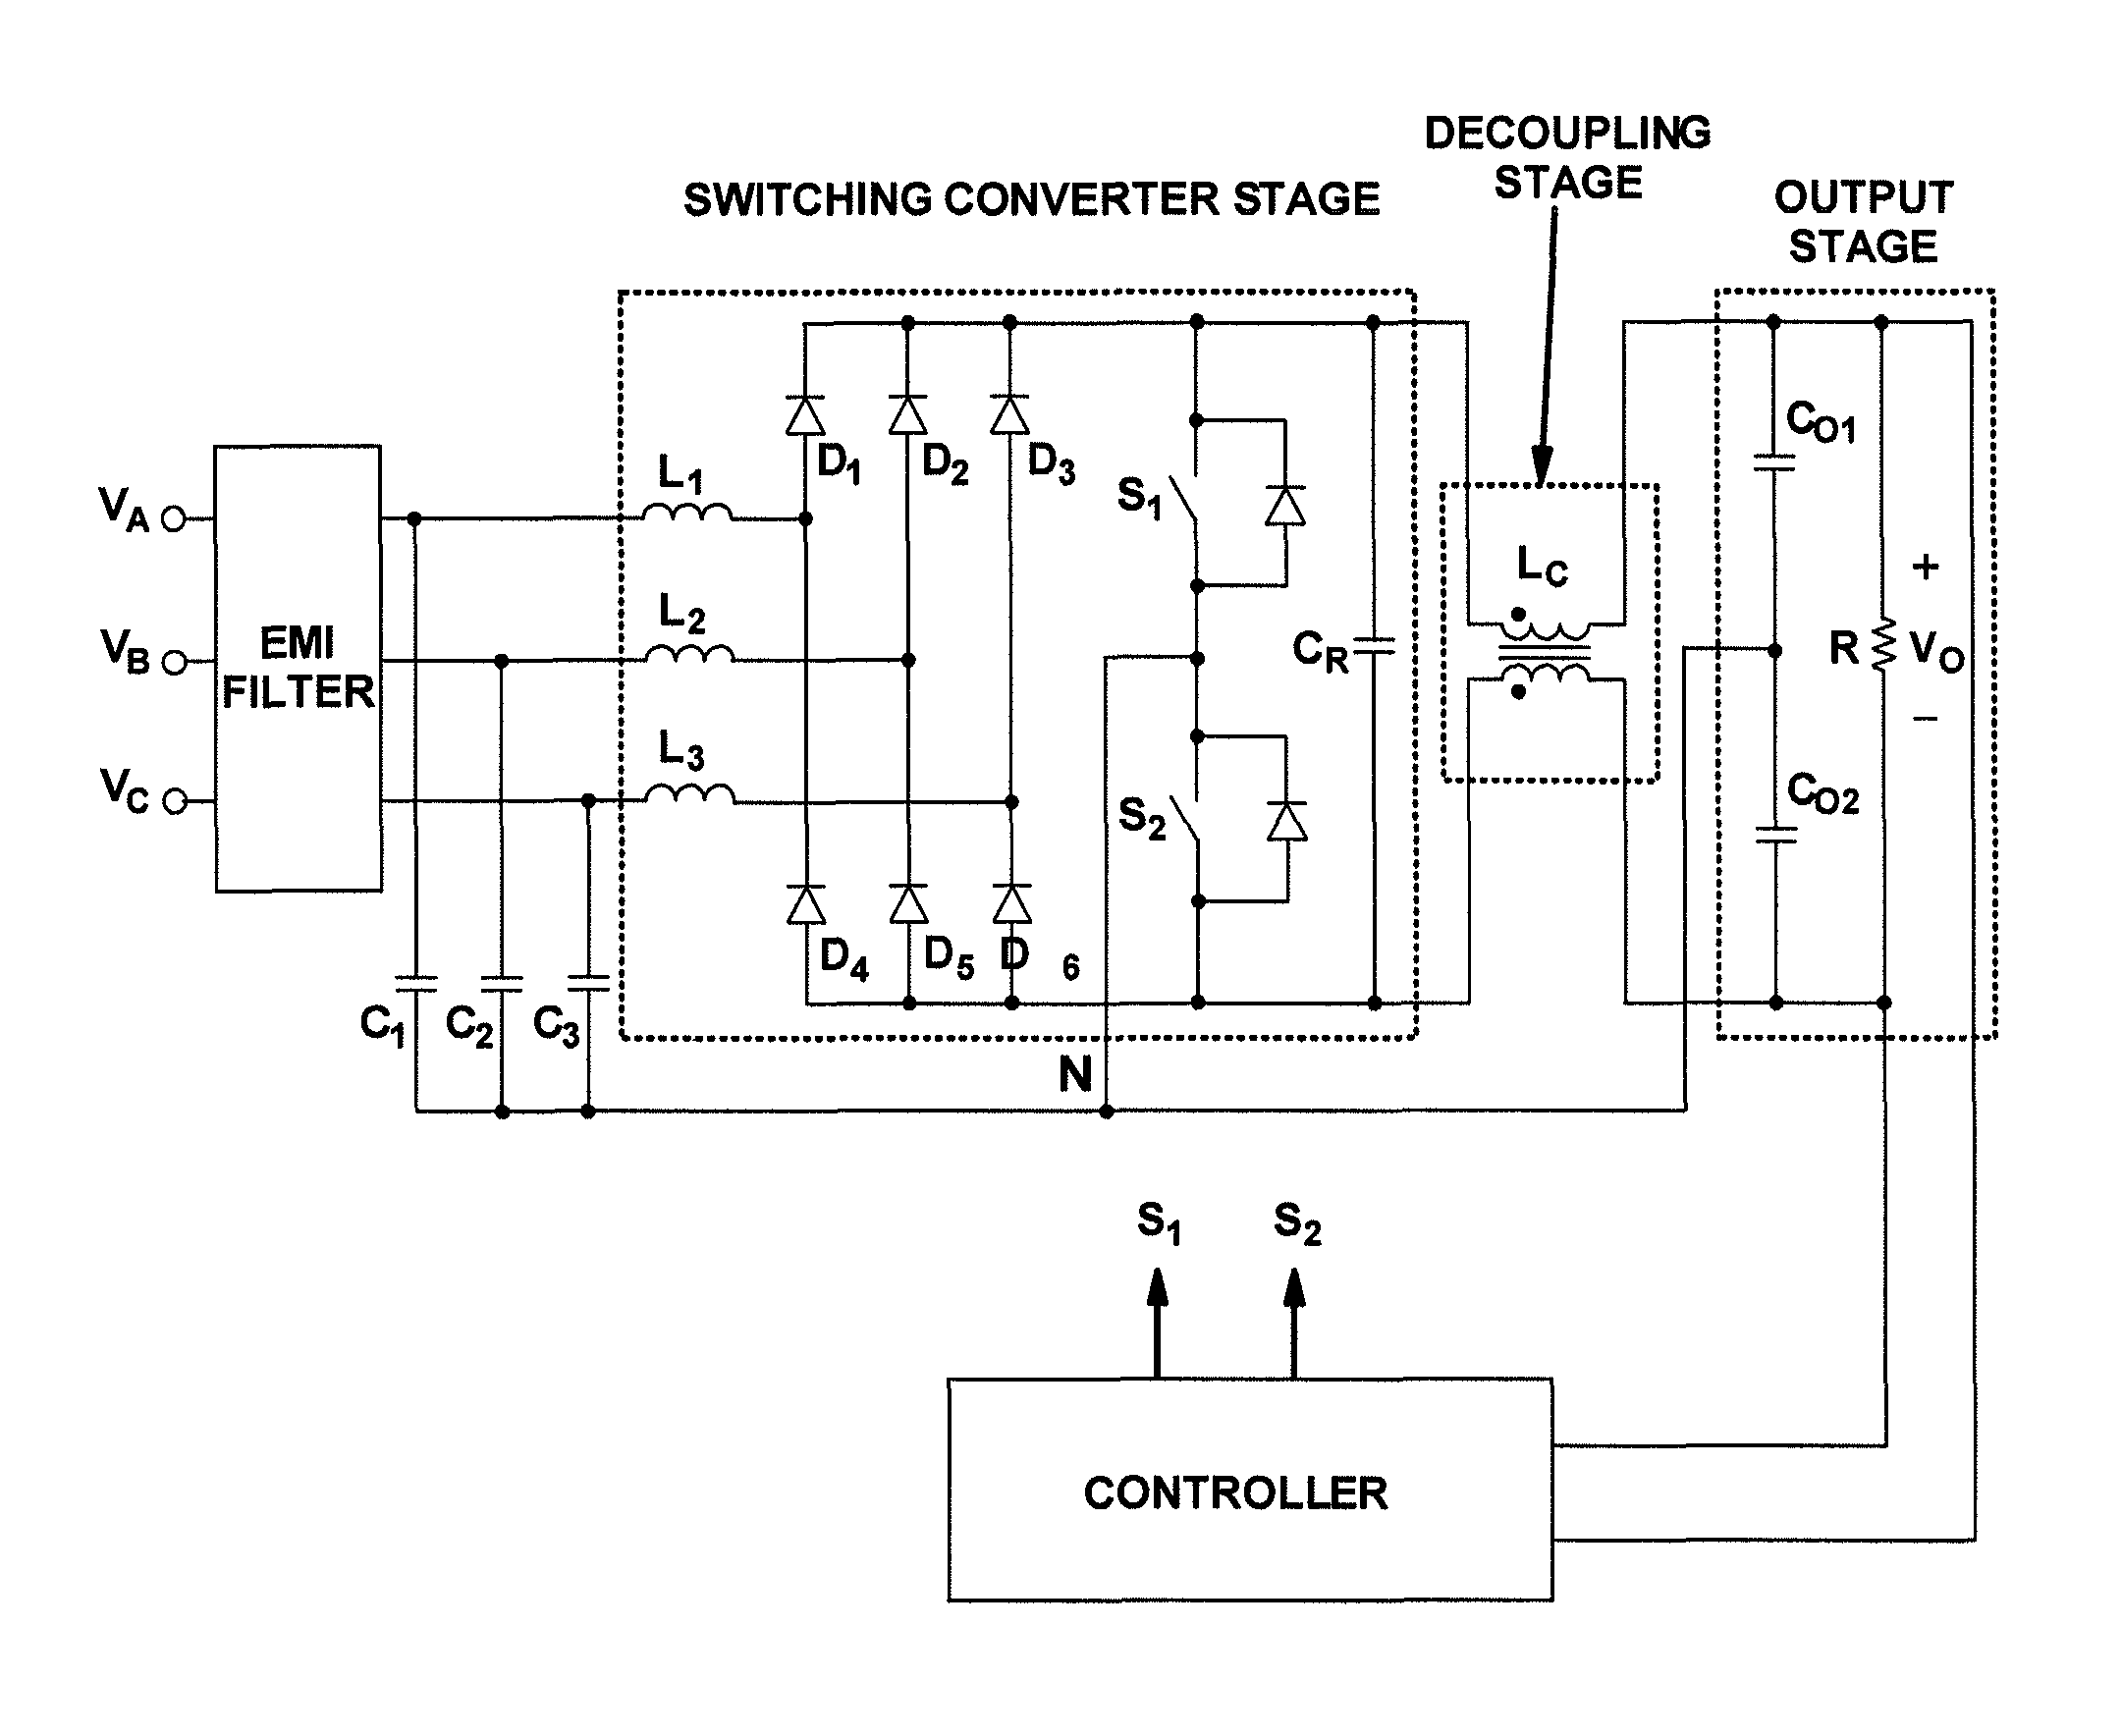 Three-phase soft-switched PFC rectifiers